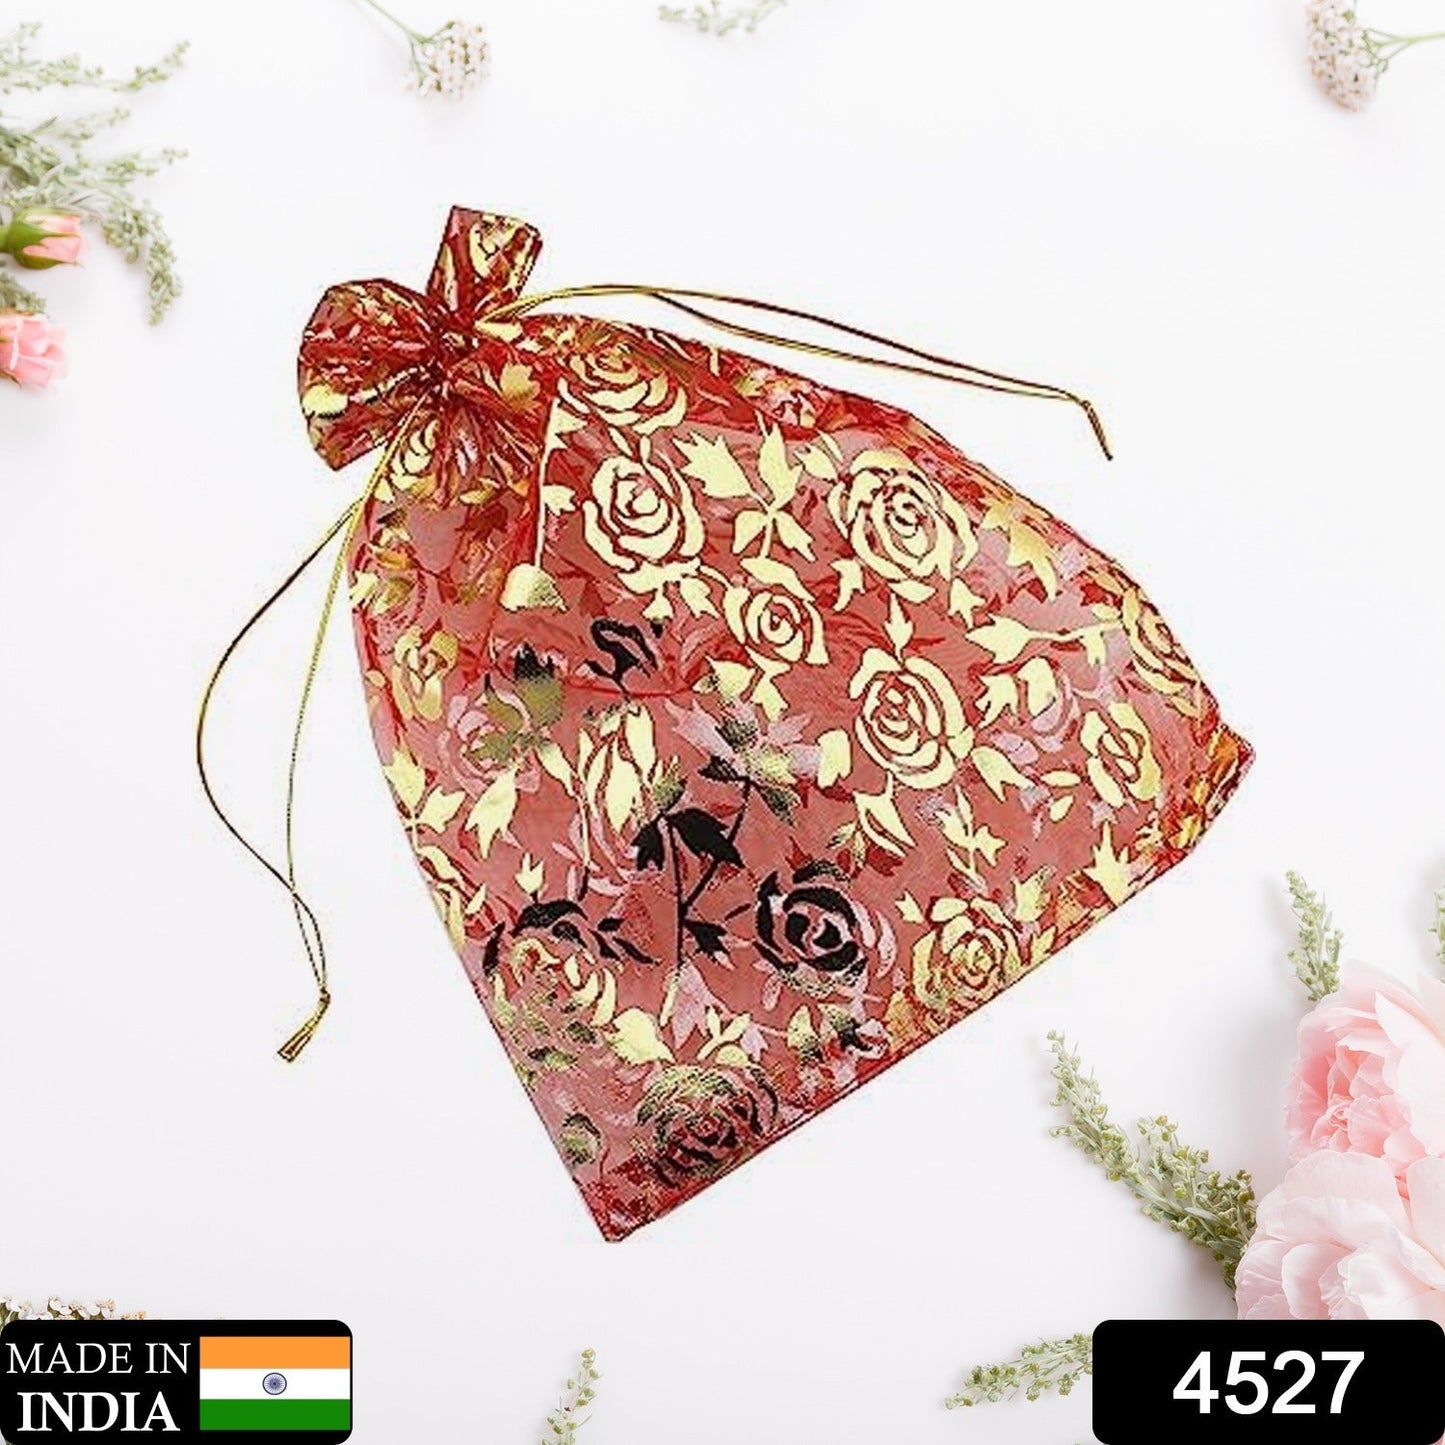 Net Fabric Drawstring Pouch for Dry Fruits Packing, Organza Shagun Potli Baba, Wedding Party Favor Gift Bags